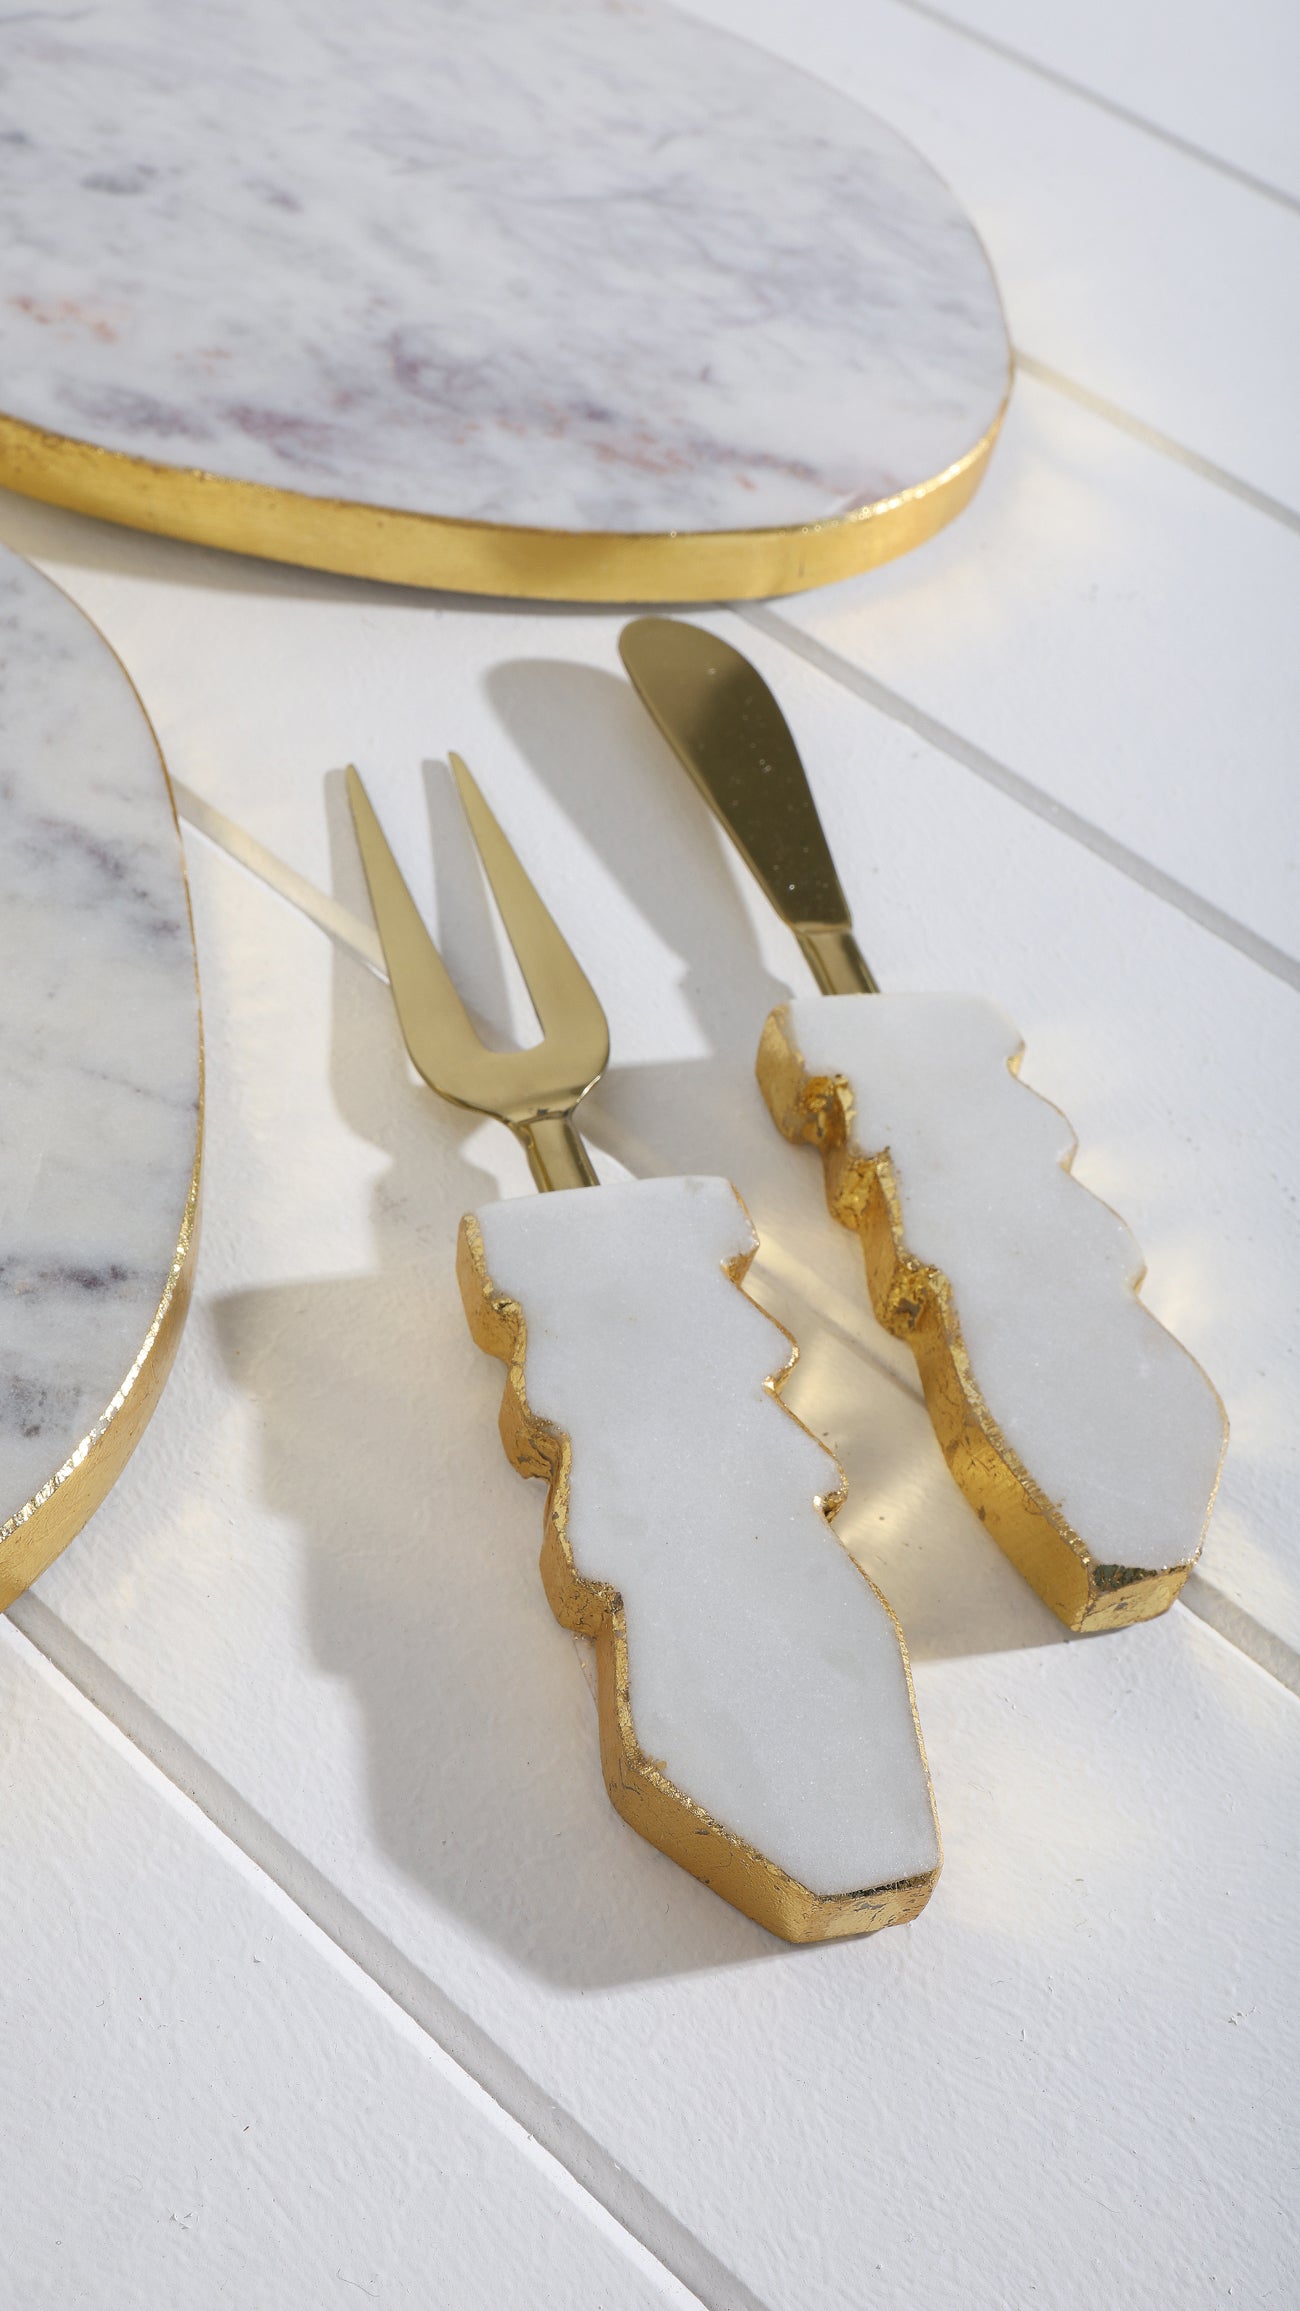 WONDA MARBLE SET OF 2 CHEESE KNIVES WITH GOLD FOIL